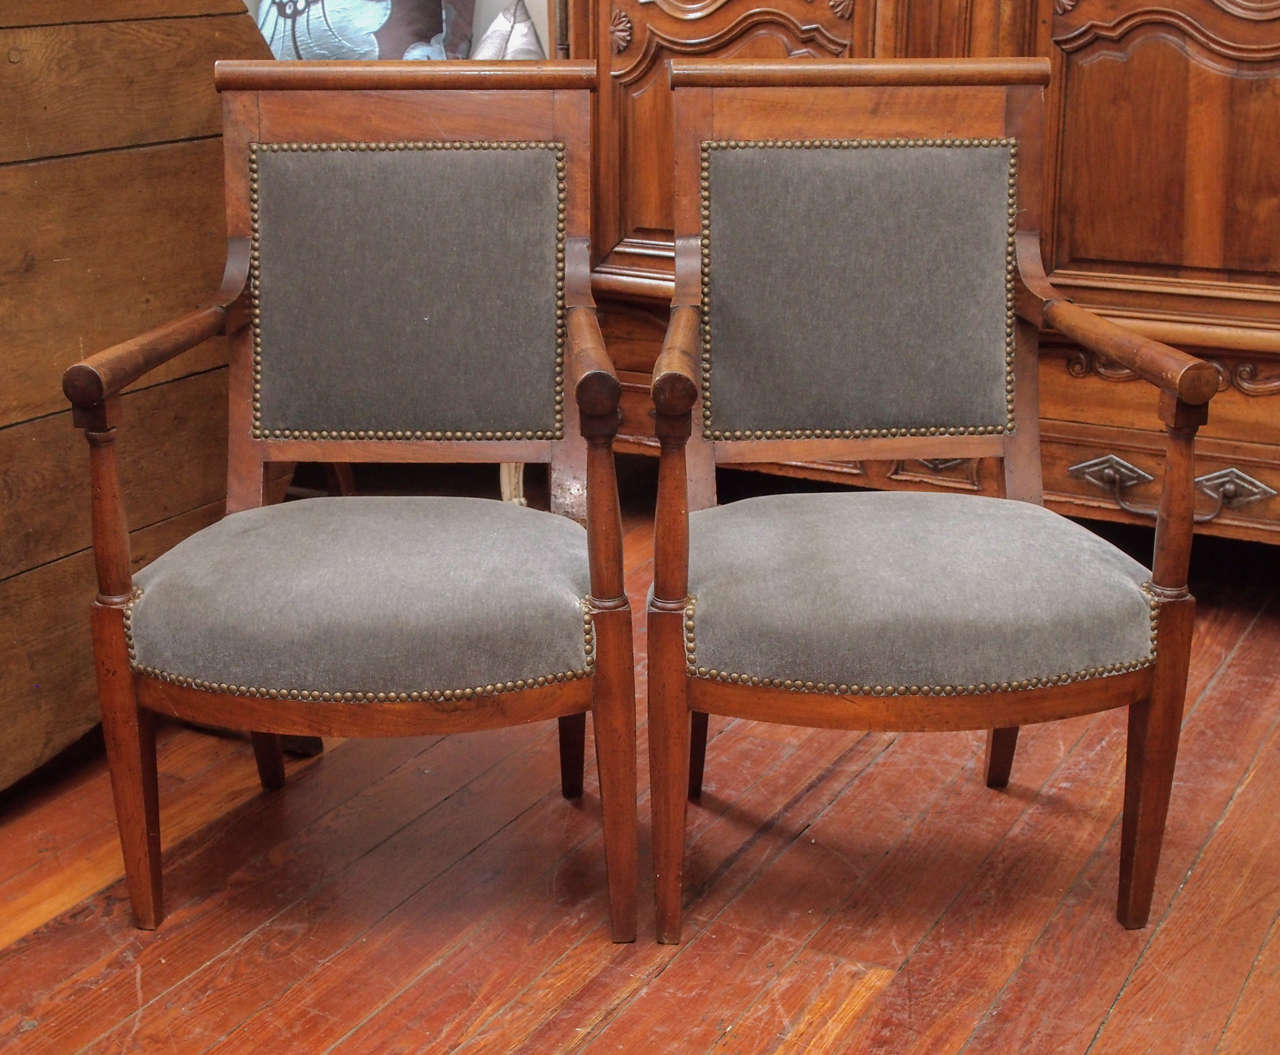 19th century pair of walnut armchairs newly reupholstered with gray mohair fabric.